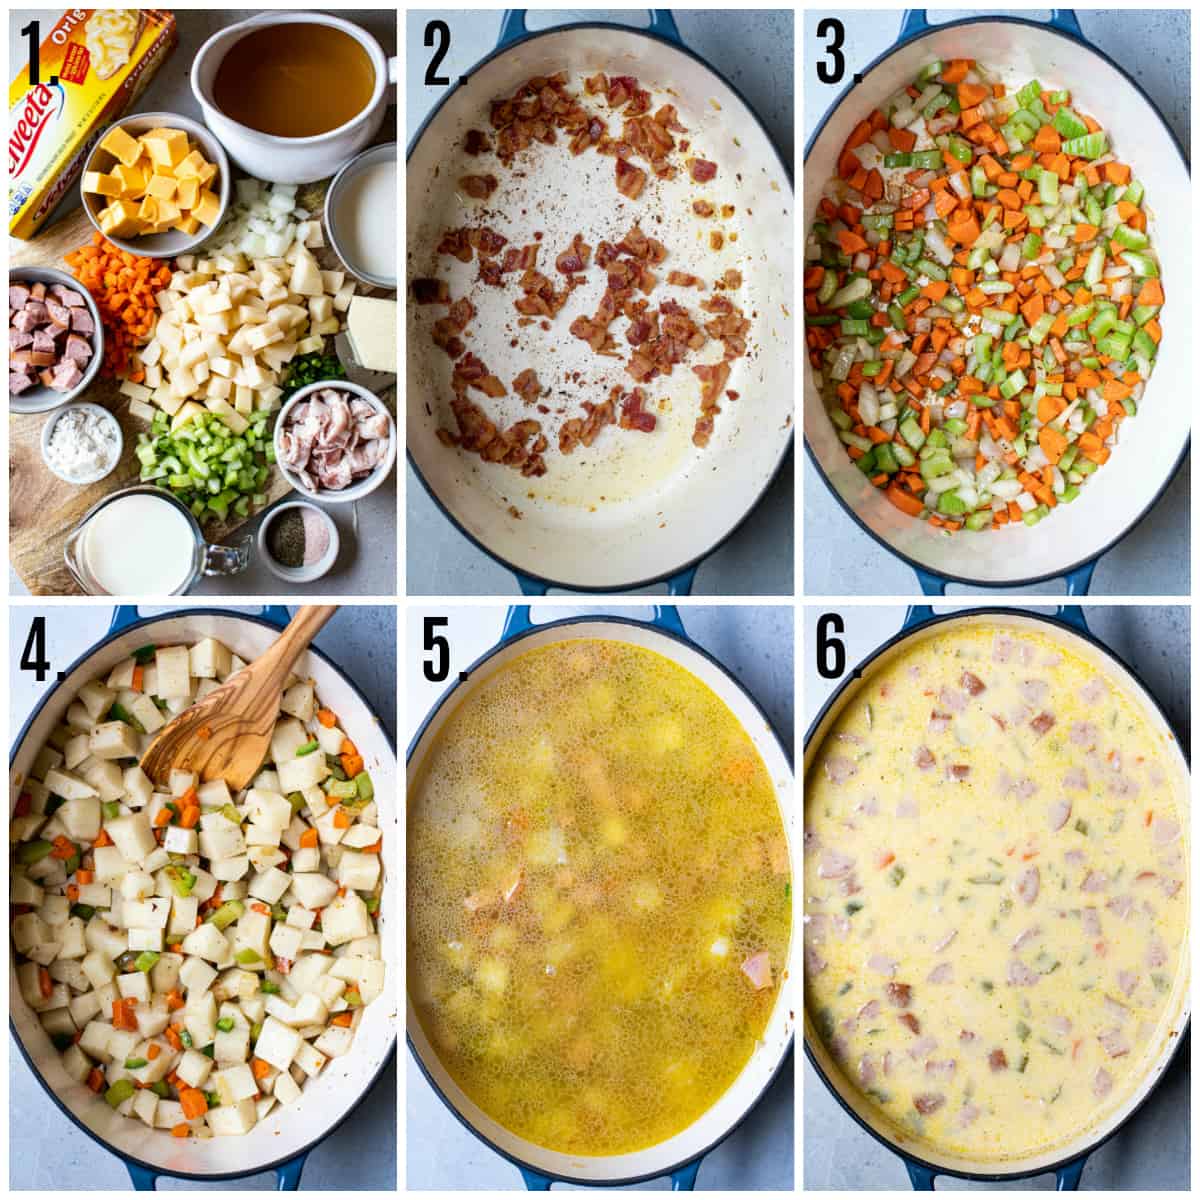 Step by step photos on how to make Creamy Potato Soup